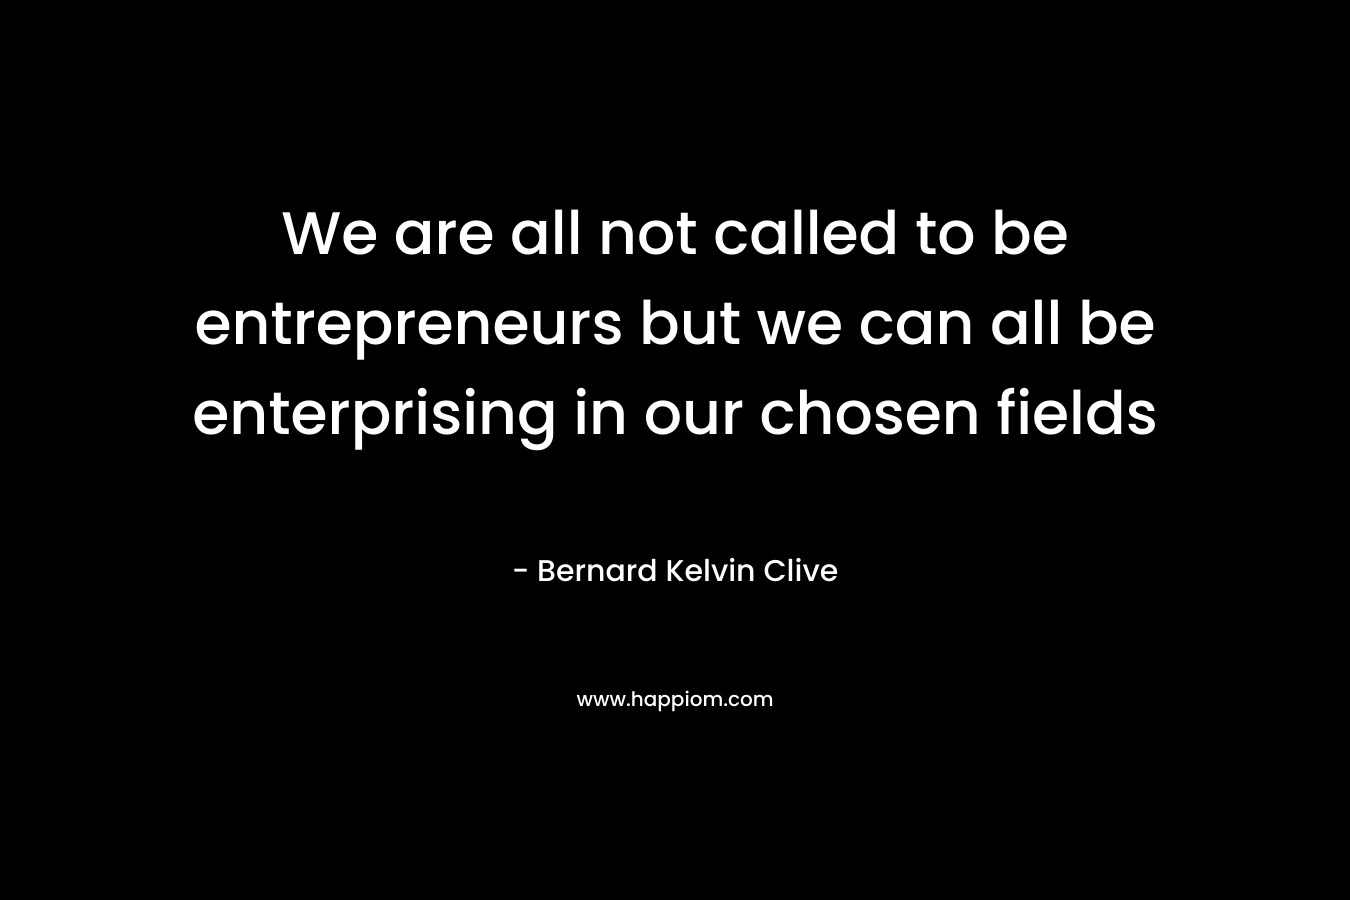 We are all not called to be entrepreneurs but we can all be enterprising in our chosen fields – Bernard Kelvin Clive